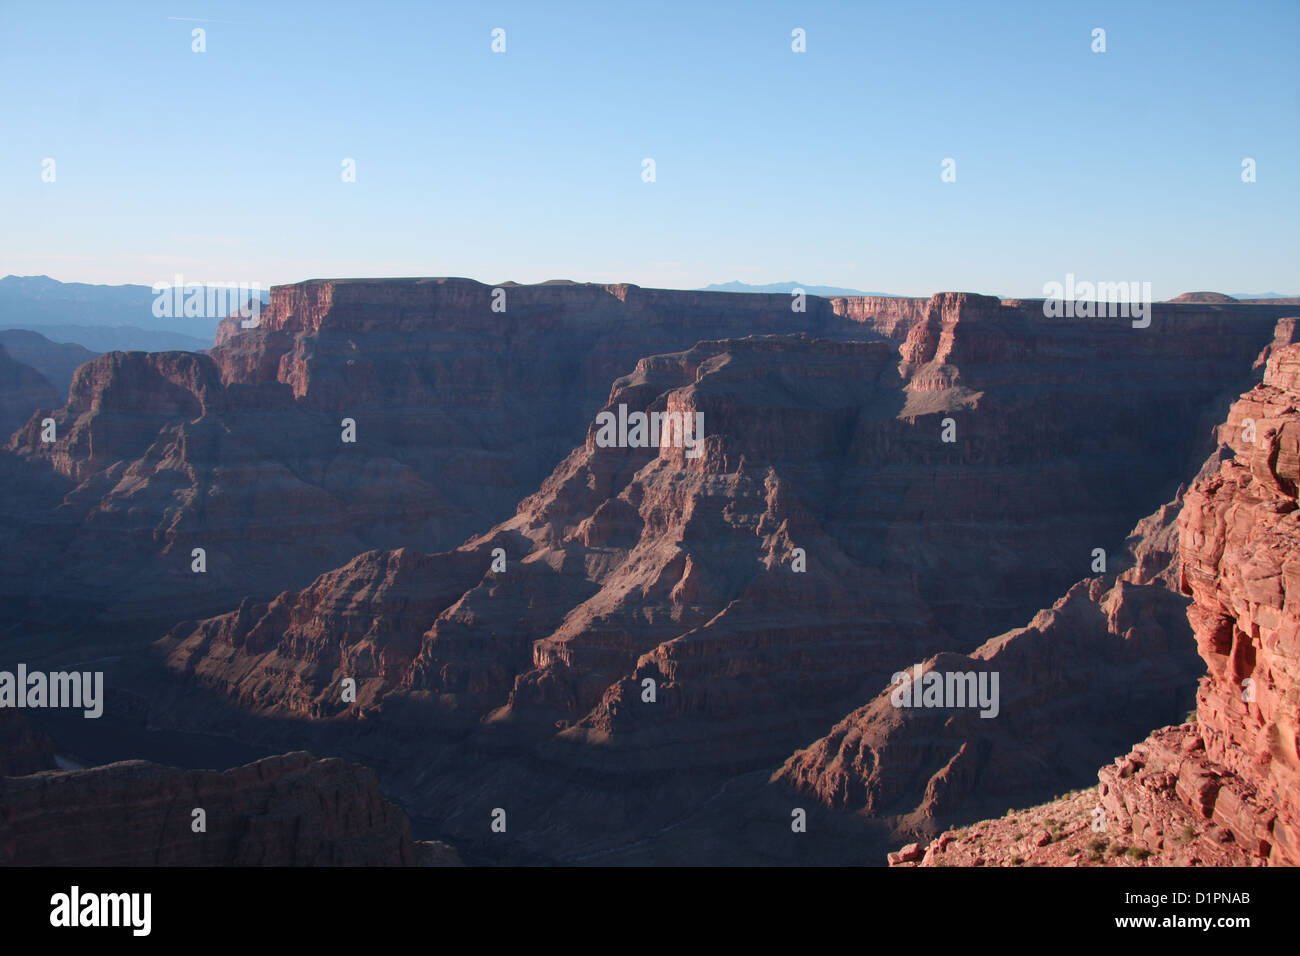 Grand canyon west arizona montagnes red rock cliff indienne Colorado river Banque D'Images